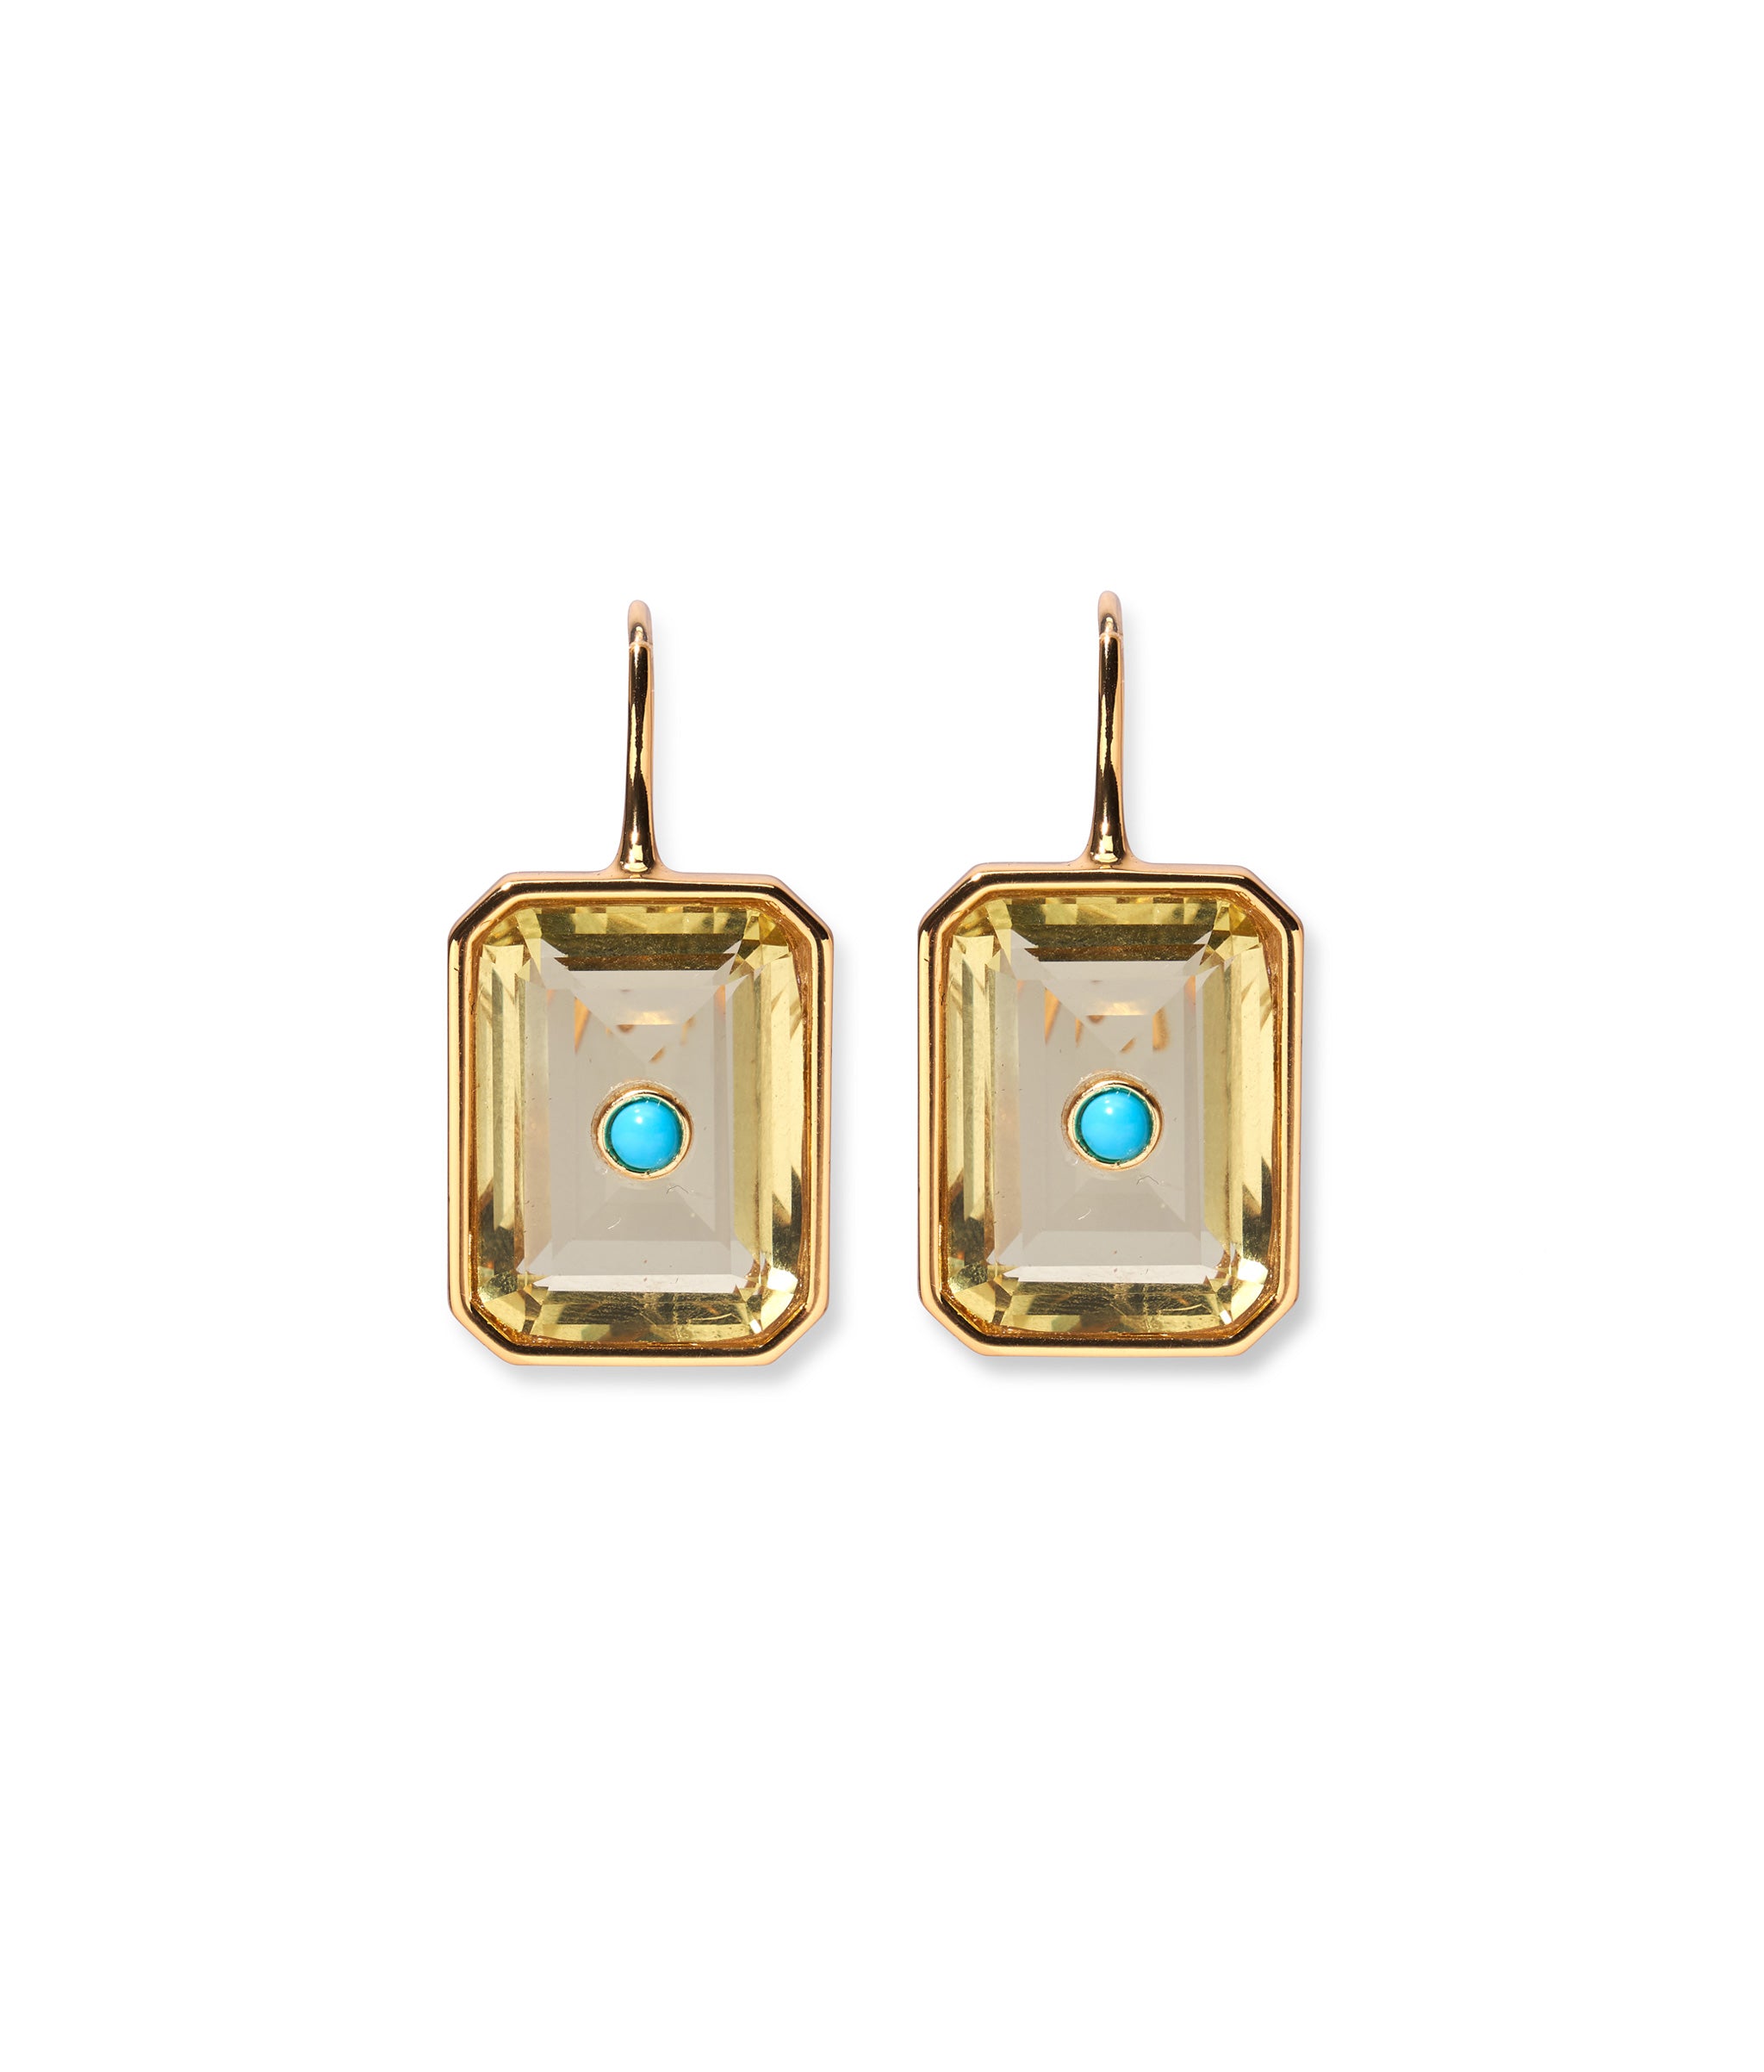 Tile Earrings in Pineapple. In gold with yellow colored glass rectangle baguettes inset with turquoise cabochons.